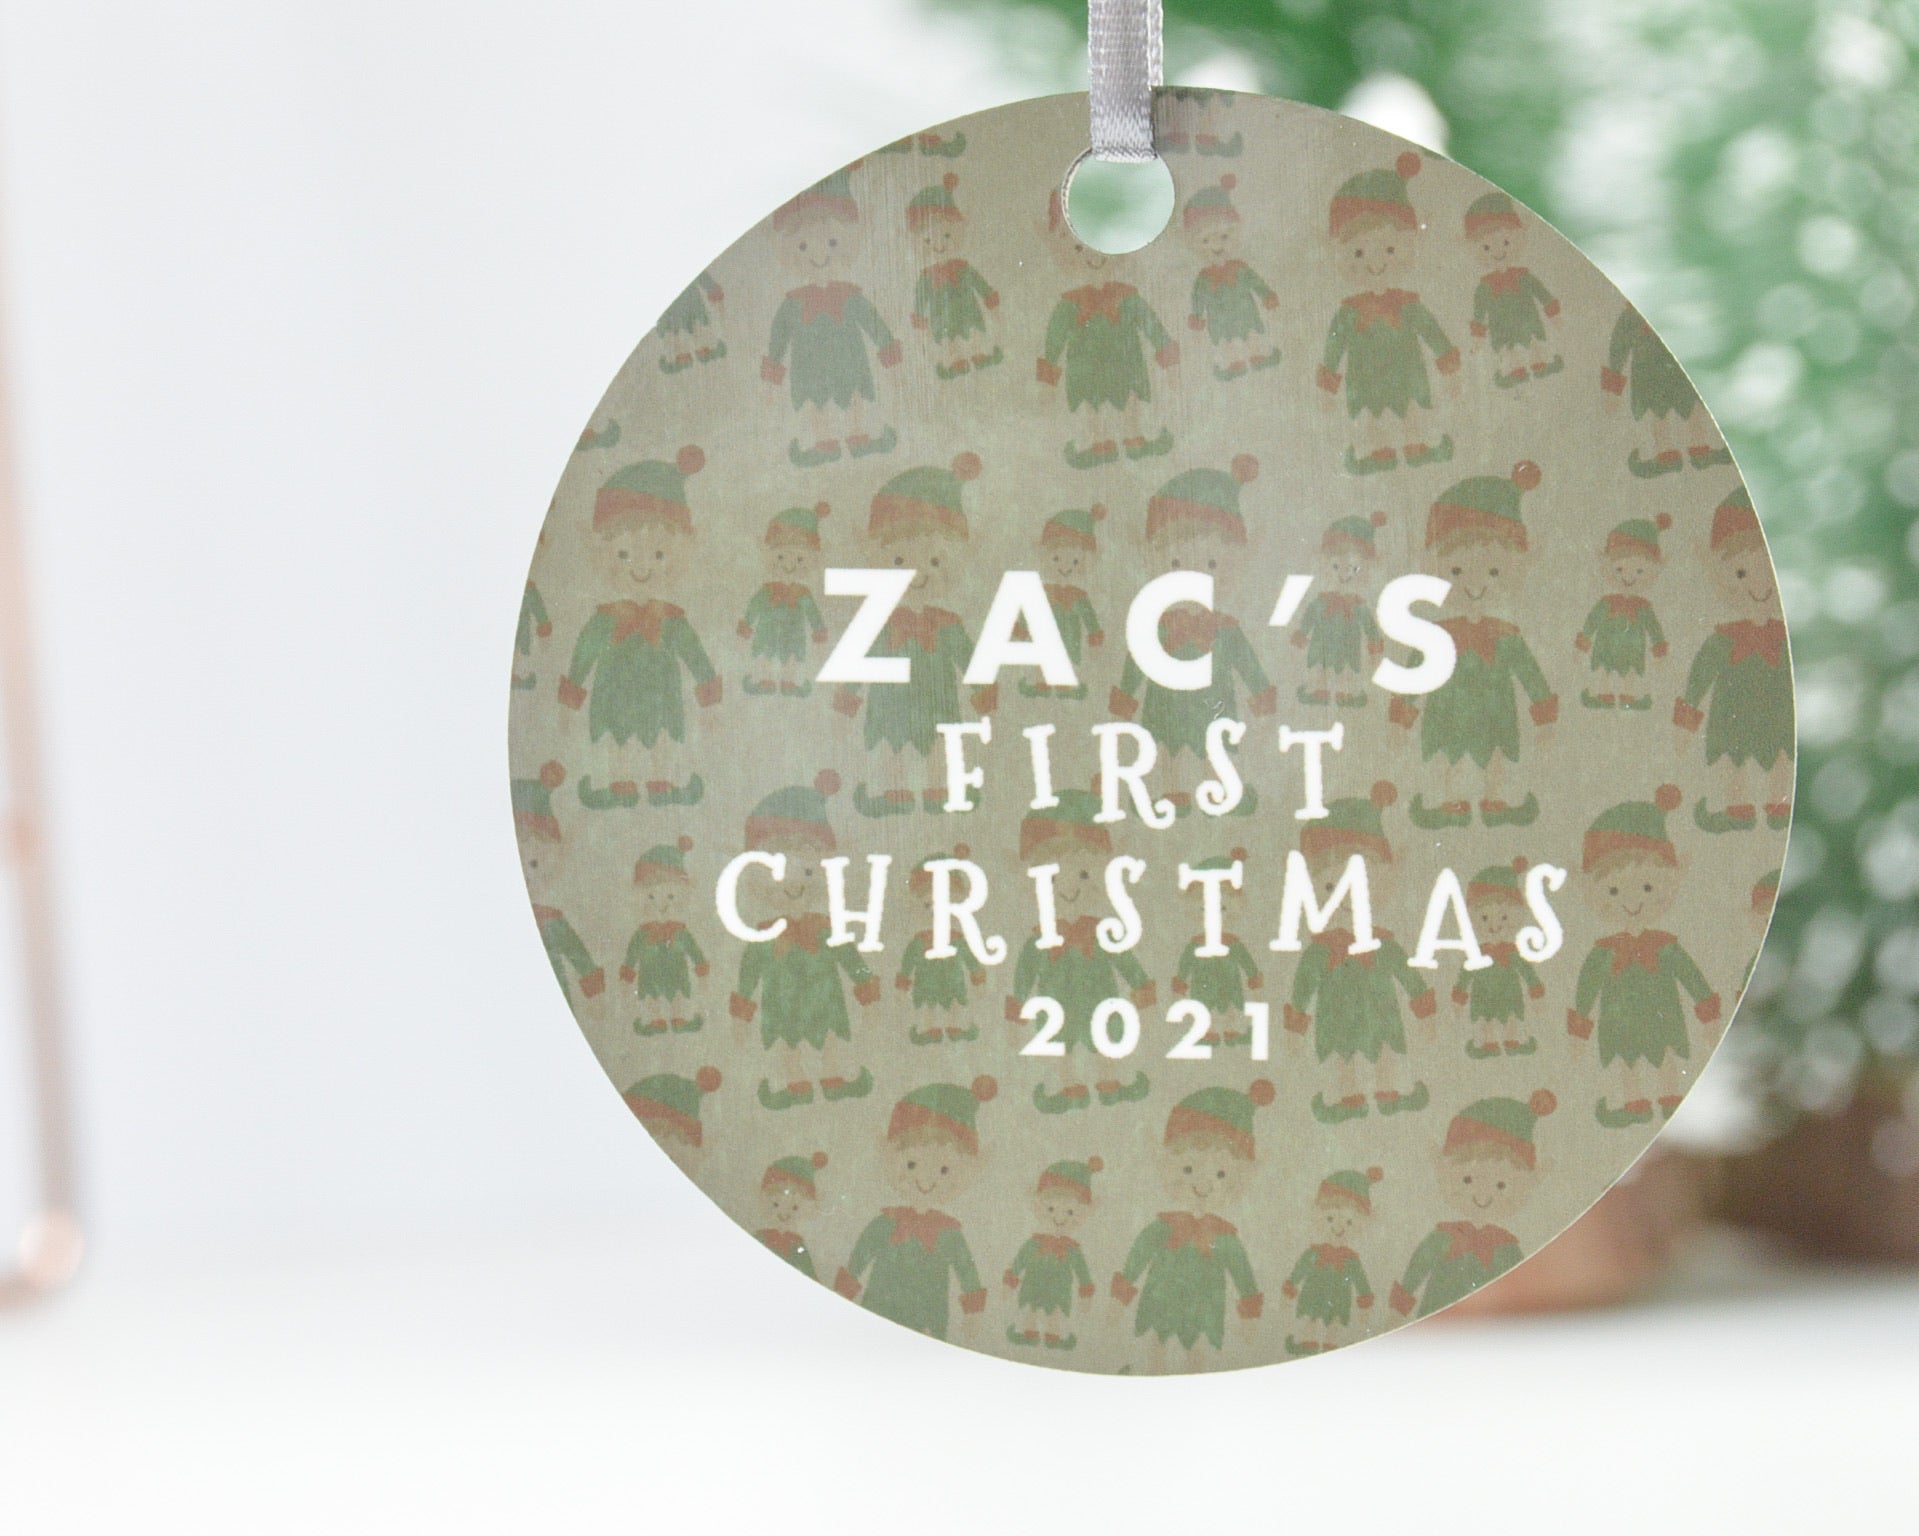 Baby's First Christmas Bauble